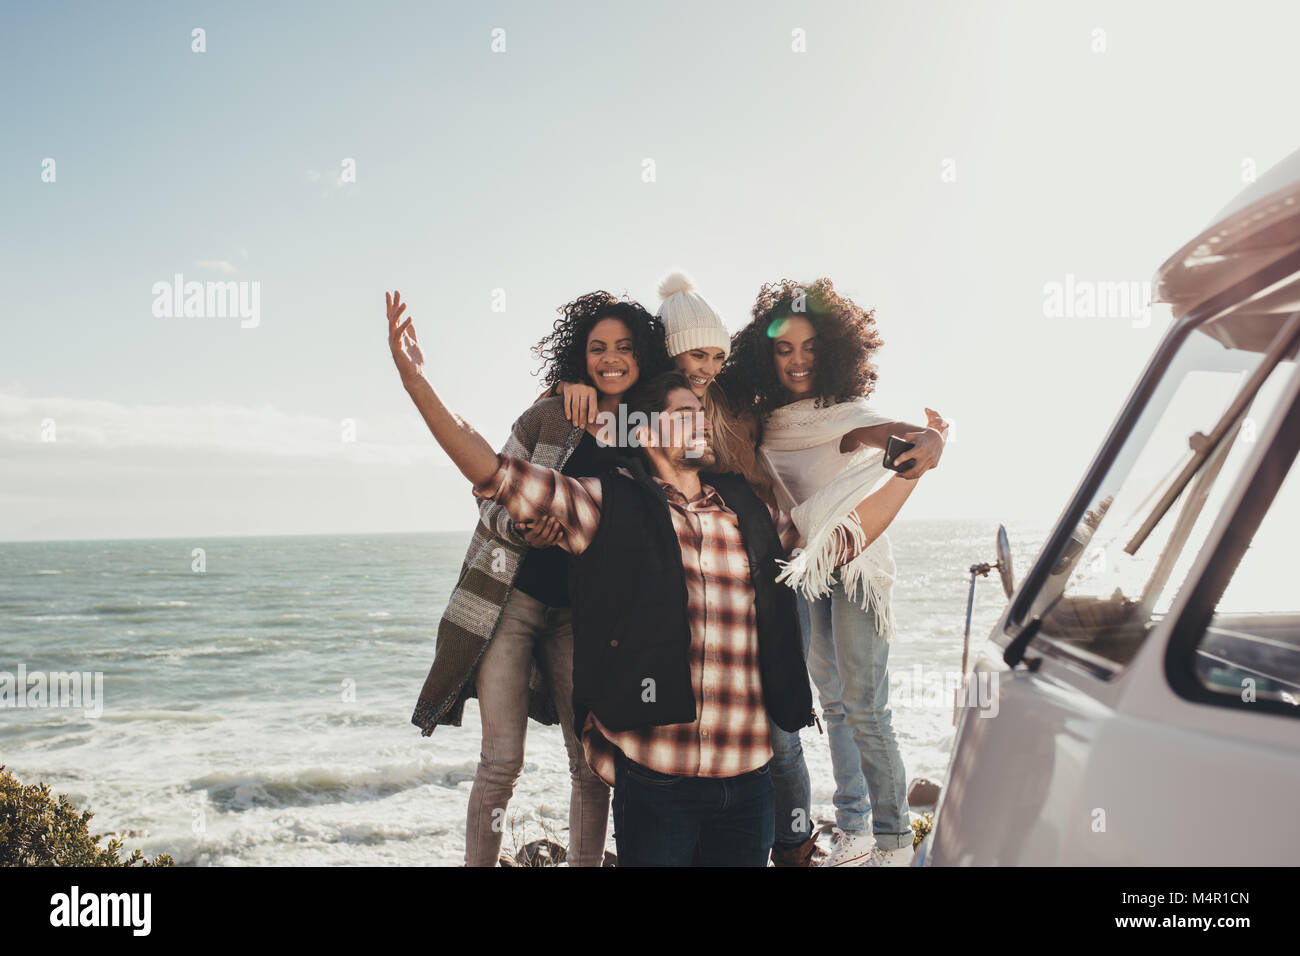 Friends on road trip taking selfie with mobile phone. Group of man and women taking self portrait outdoors. Stock Photo